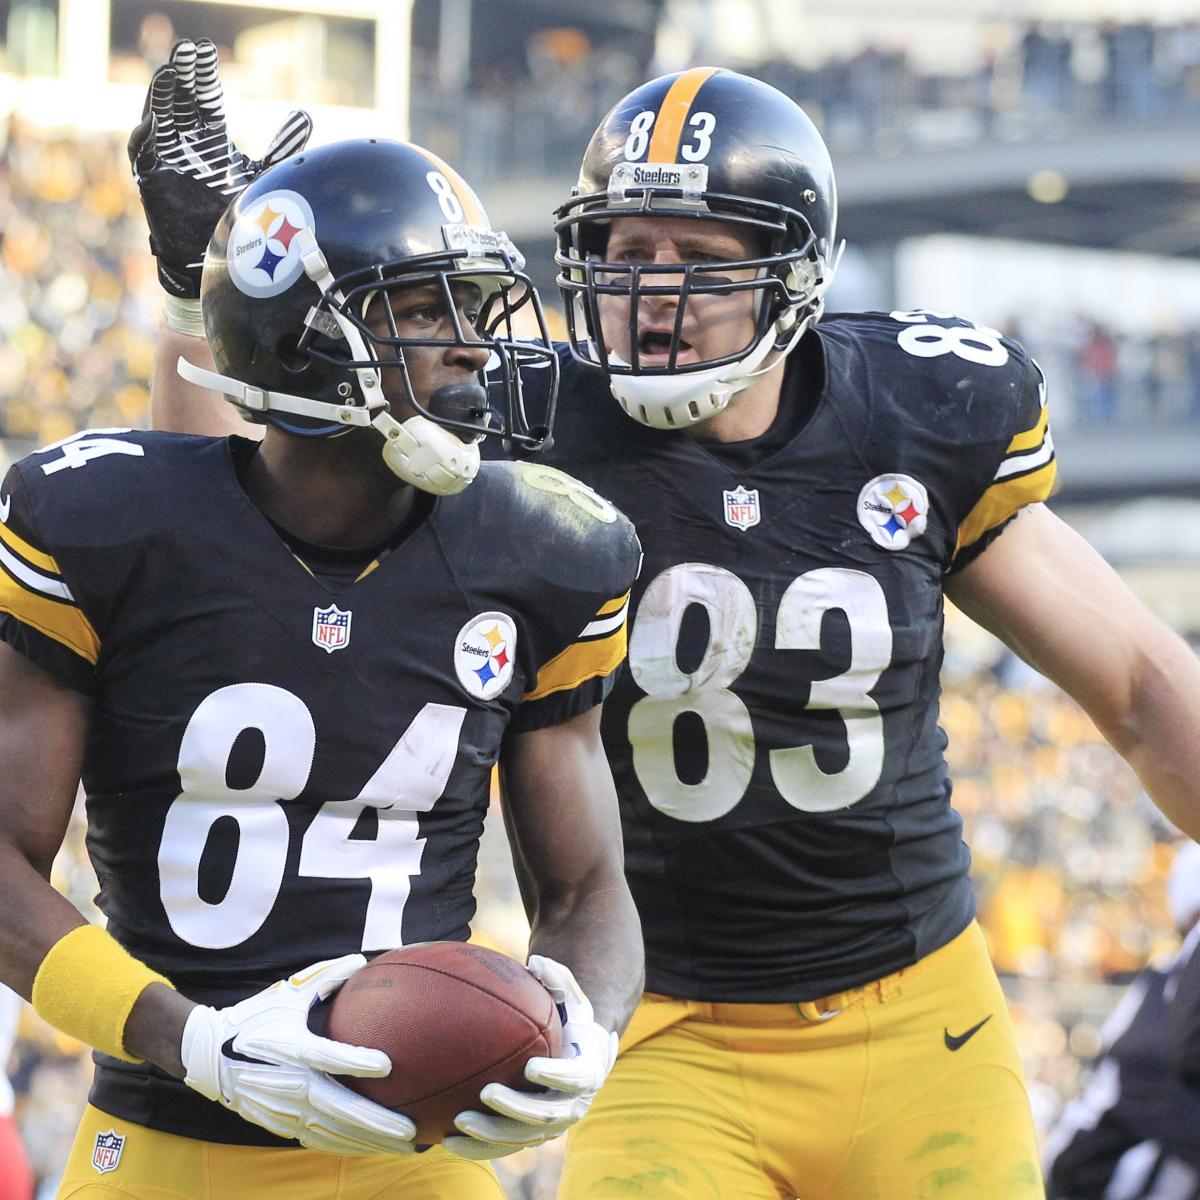 NFL Playoff Scenarios 2014-15: AFC, NFC Picture and Week 17 Predictions | Bleacher Report